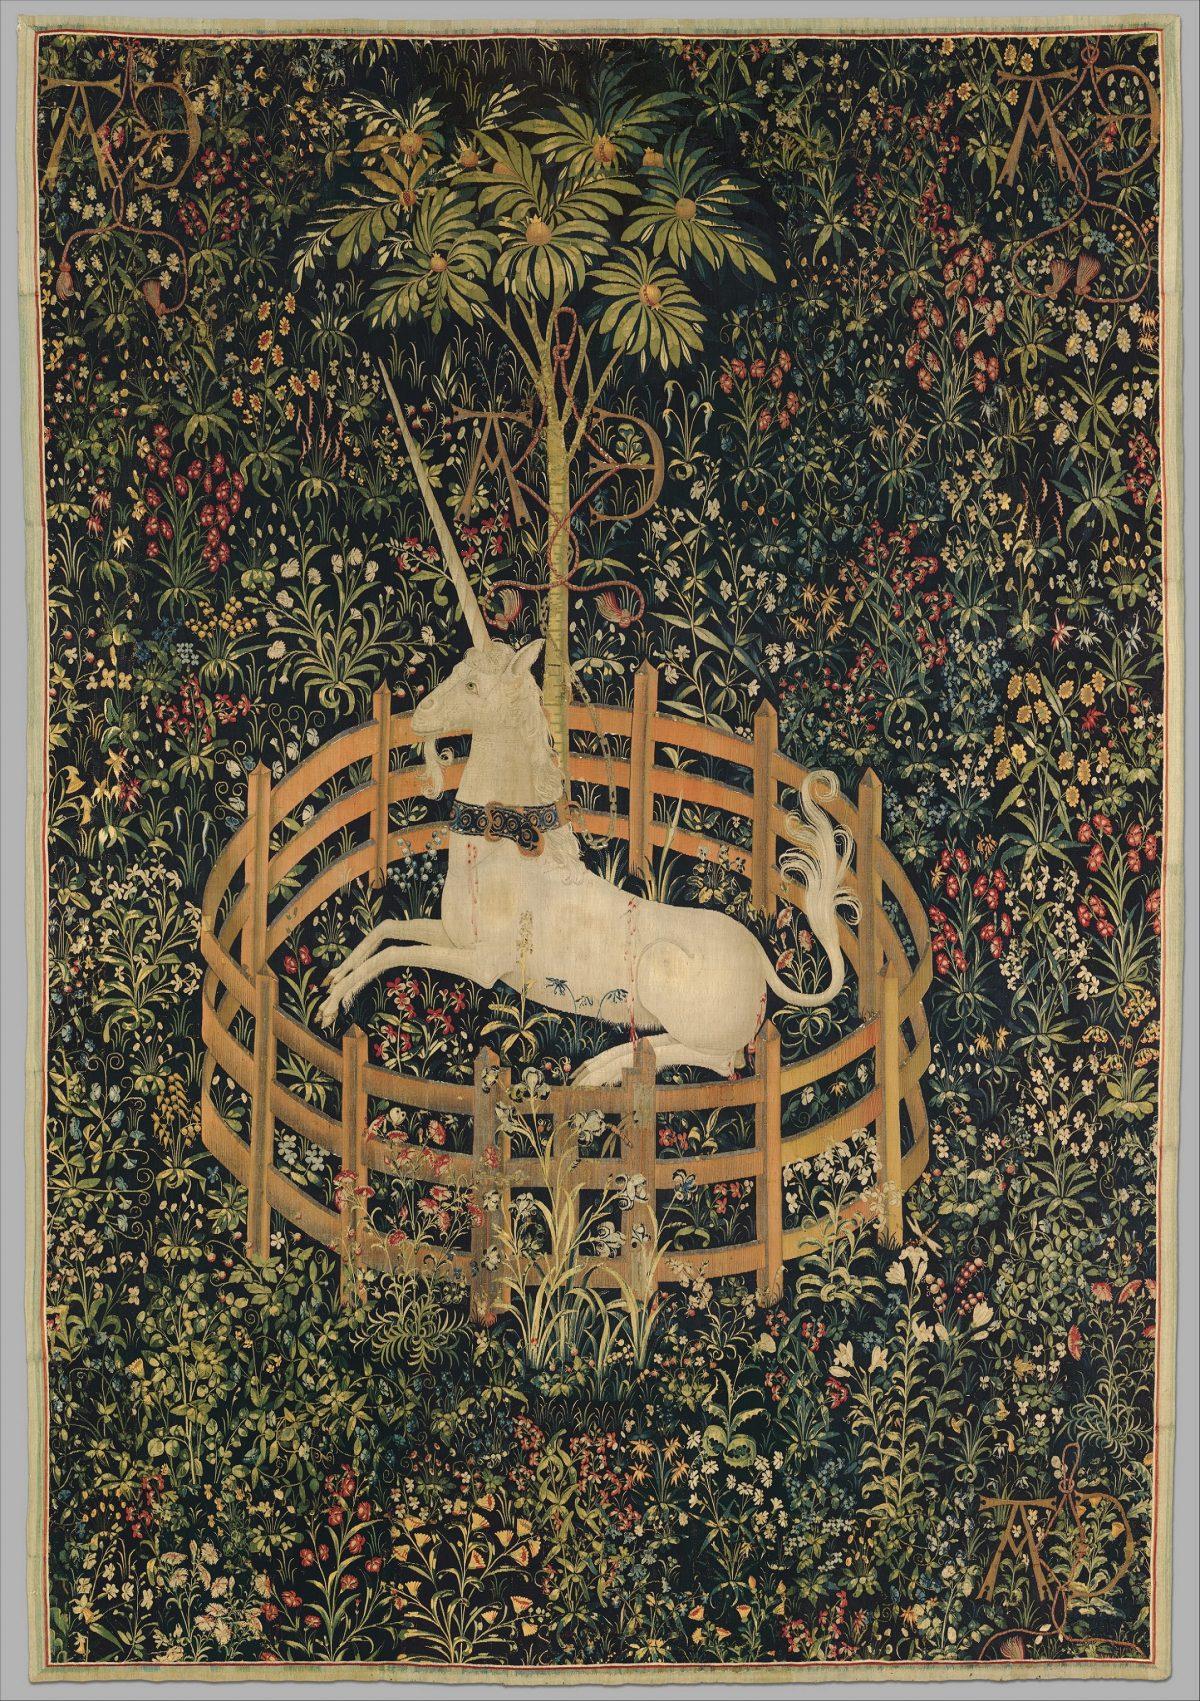 “The Unicorn in Captivity,” 1495–1505, South Netherlandish. Wool warp with wool, silk, silver, and gilt wefts; 144 7/8 inches by 99 inches. Gift of John D. Rockefeller Jr., 1937, The Met Cloisters. (The Metropolitan Museum of Art )